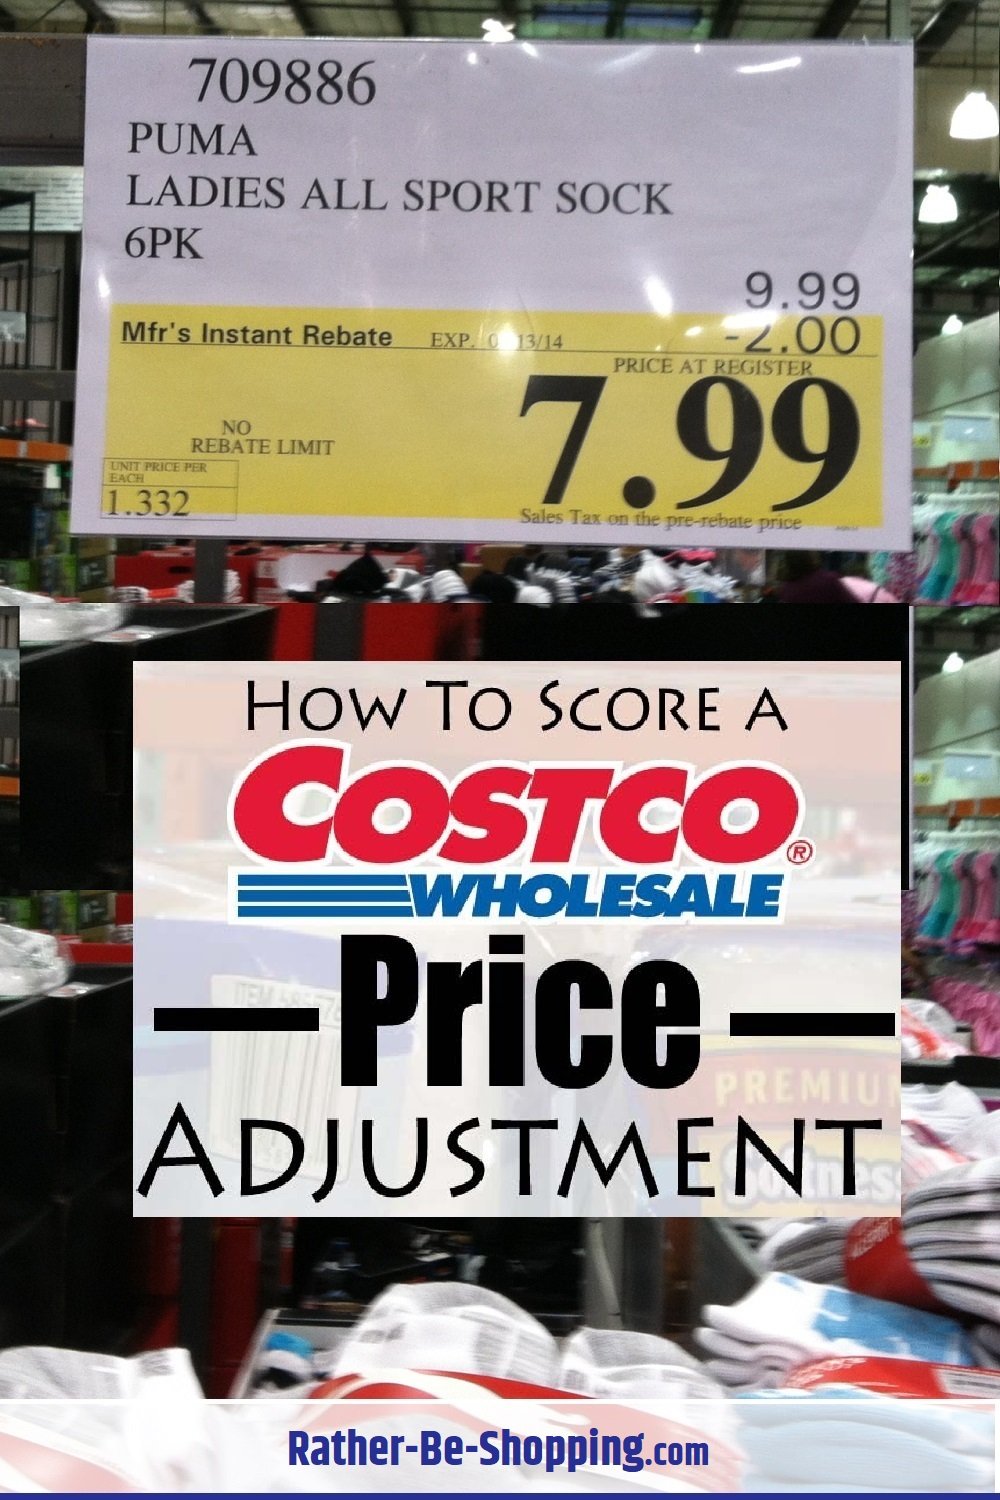 Costco Secret #3: A Costco price match/ adjustment is when you buy